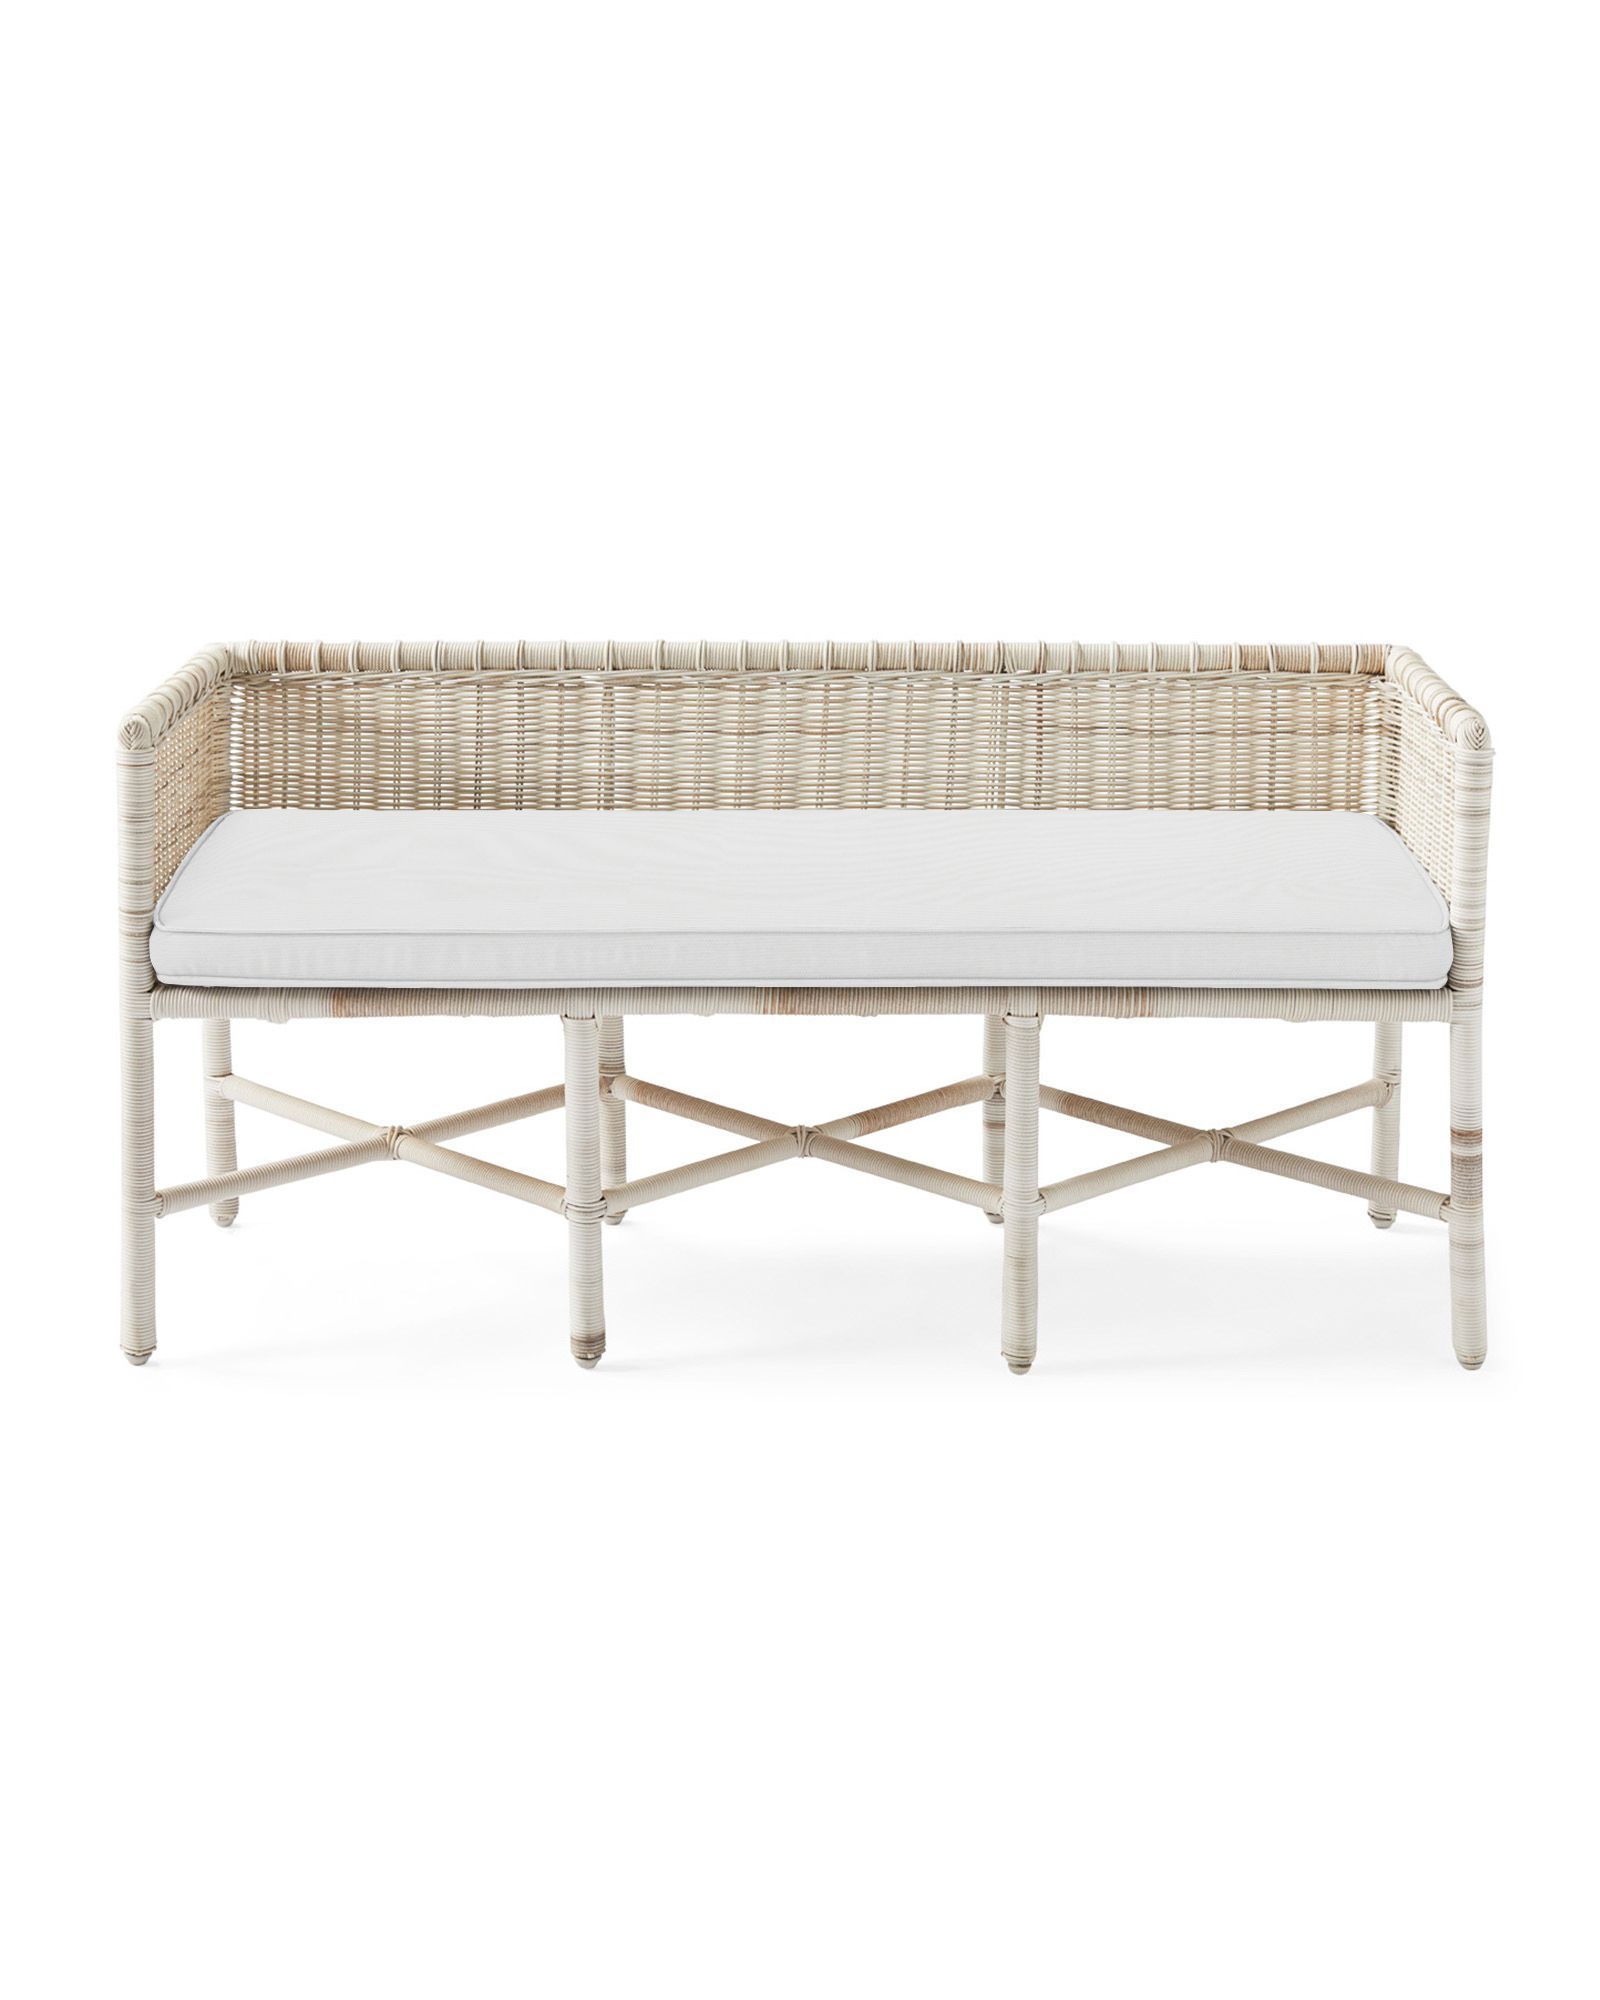 Pacifica Bench Cushion | Serena and Lily